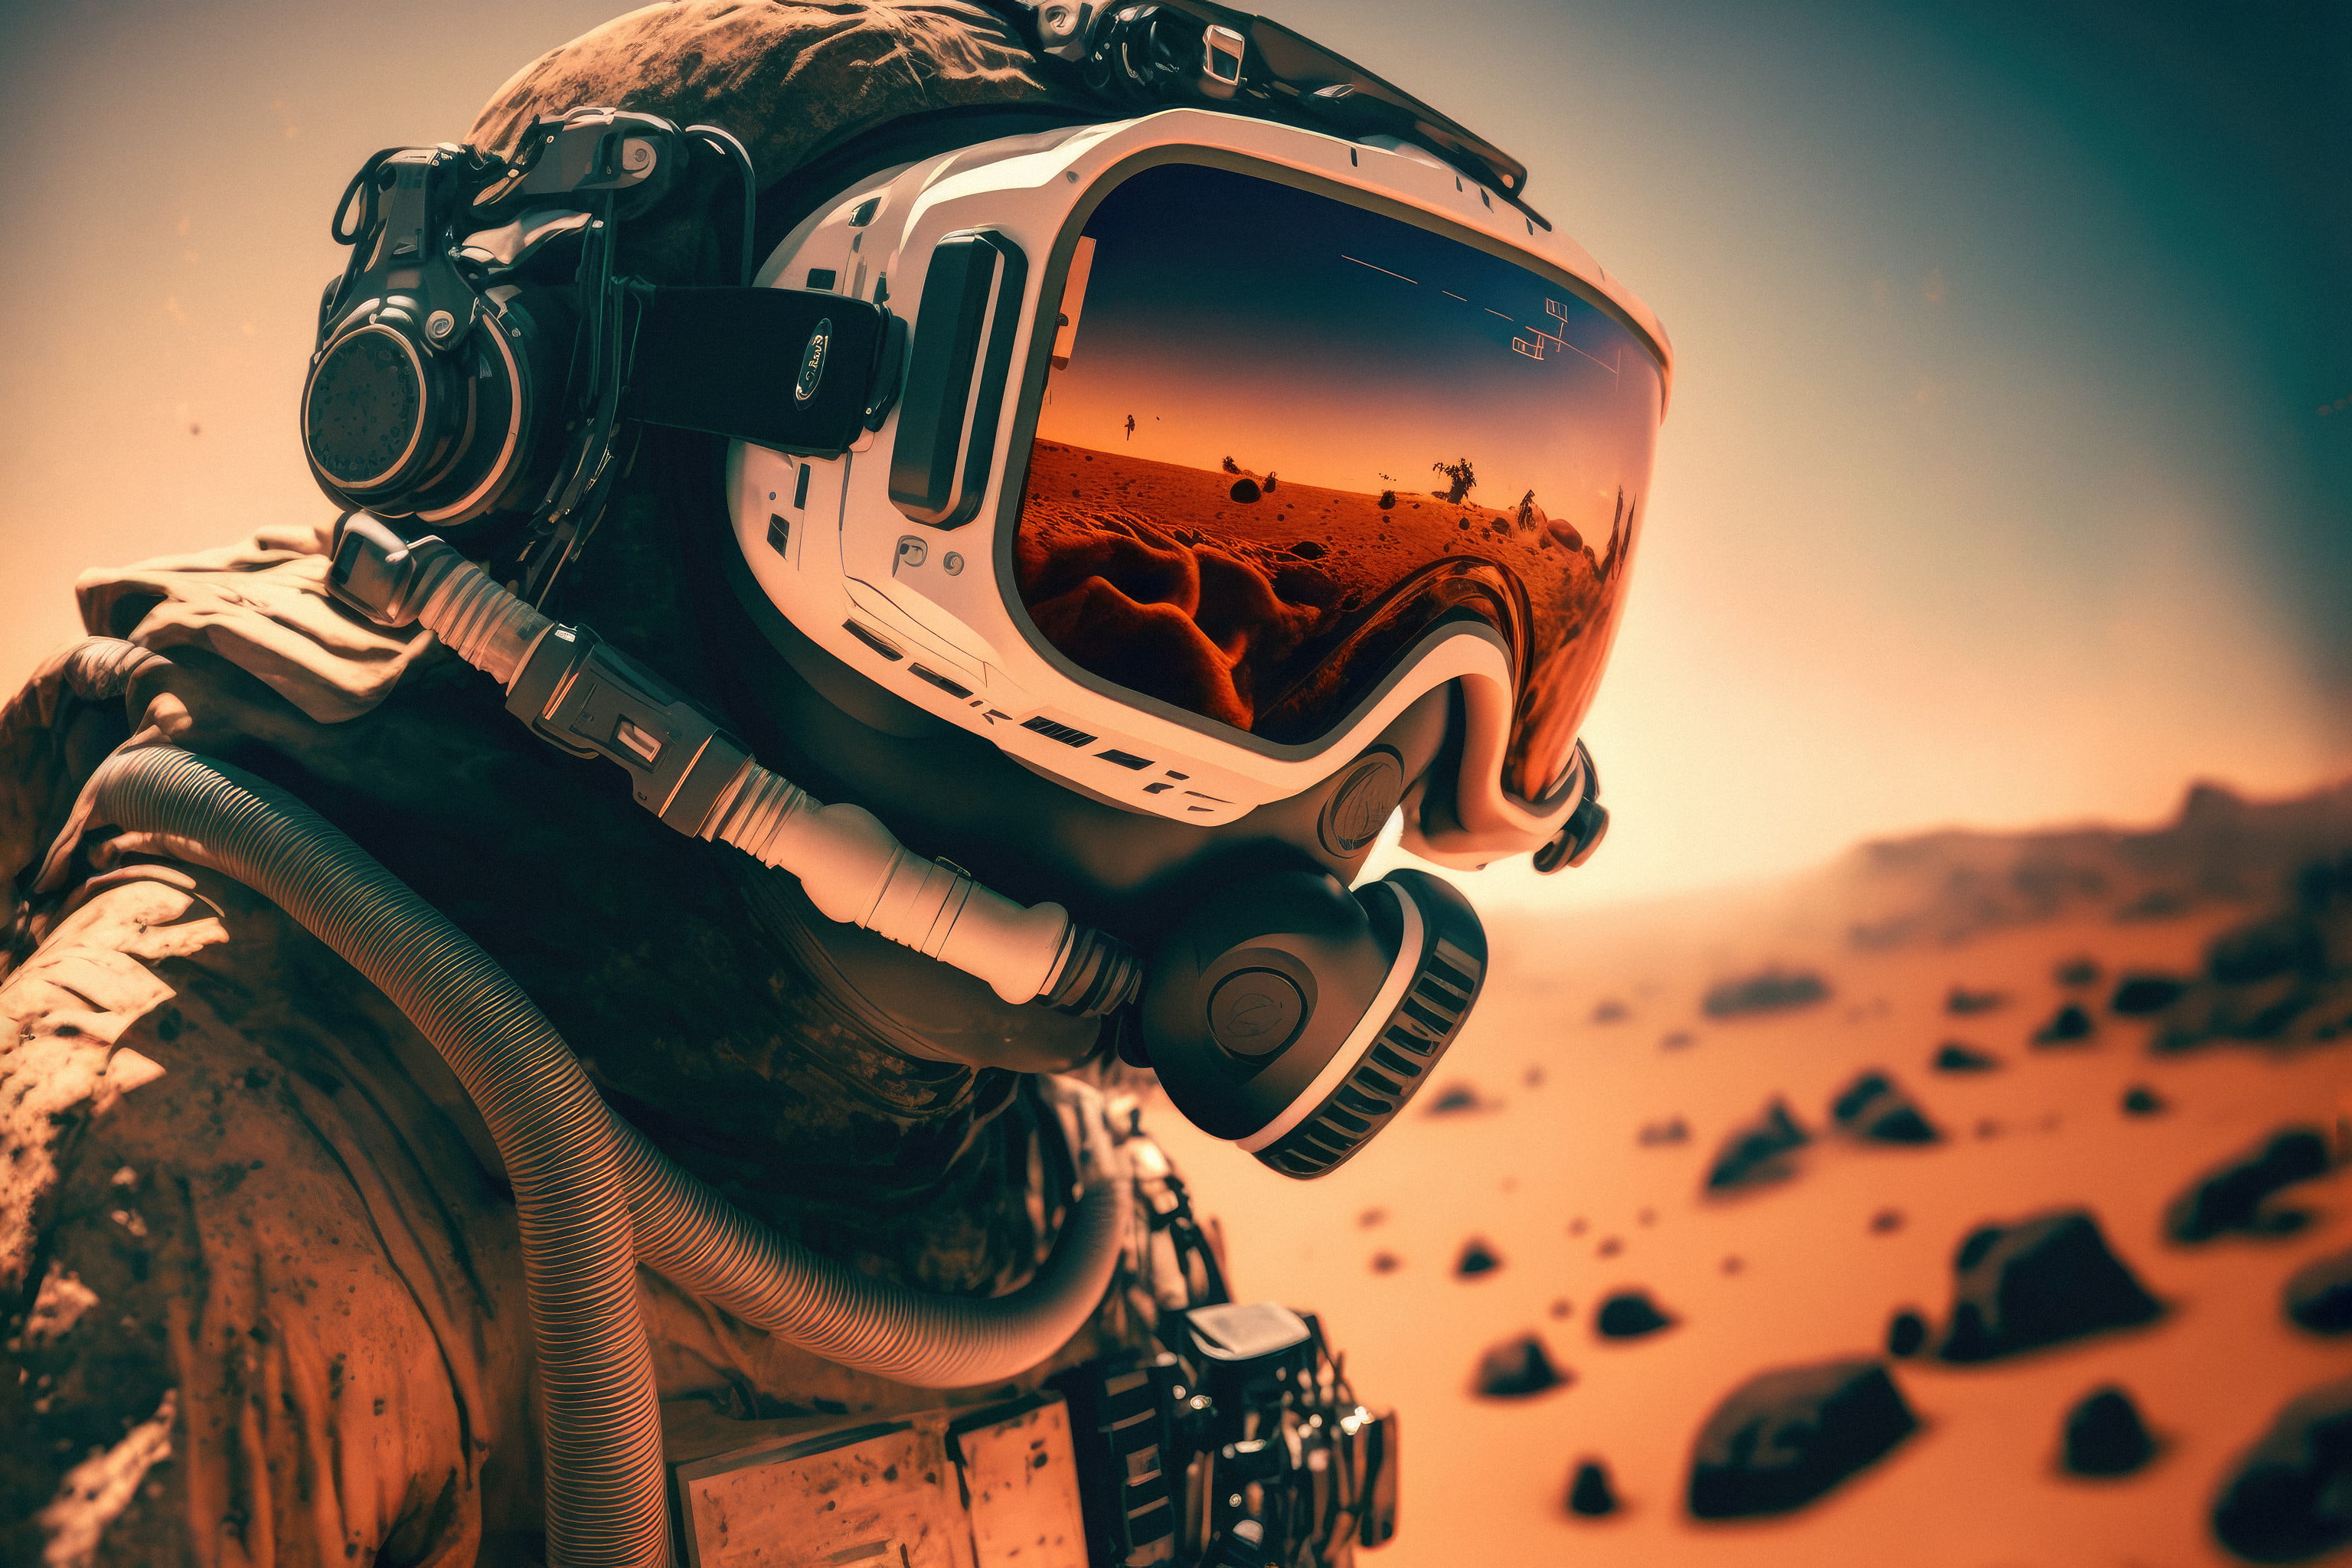 On a trip to Mars, VR could combat loneliness and boredom